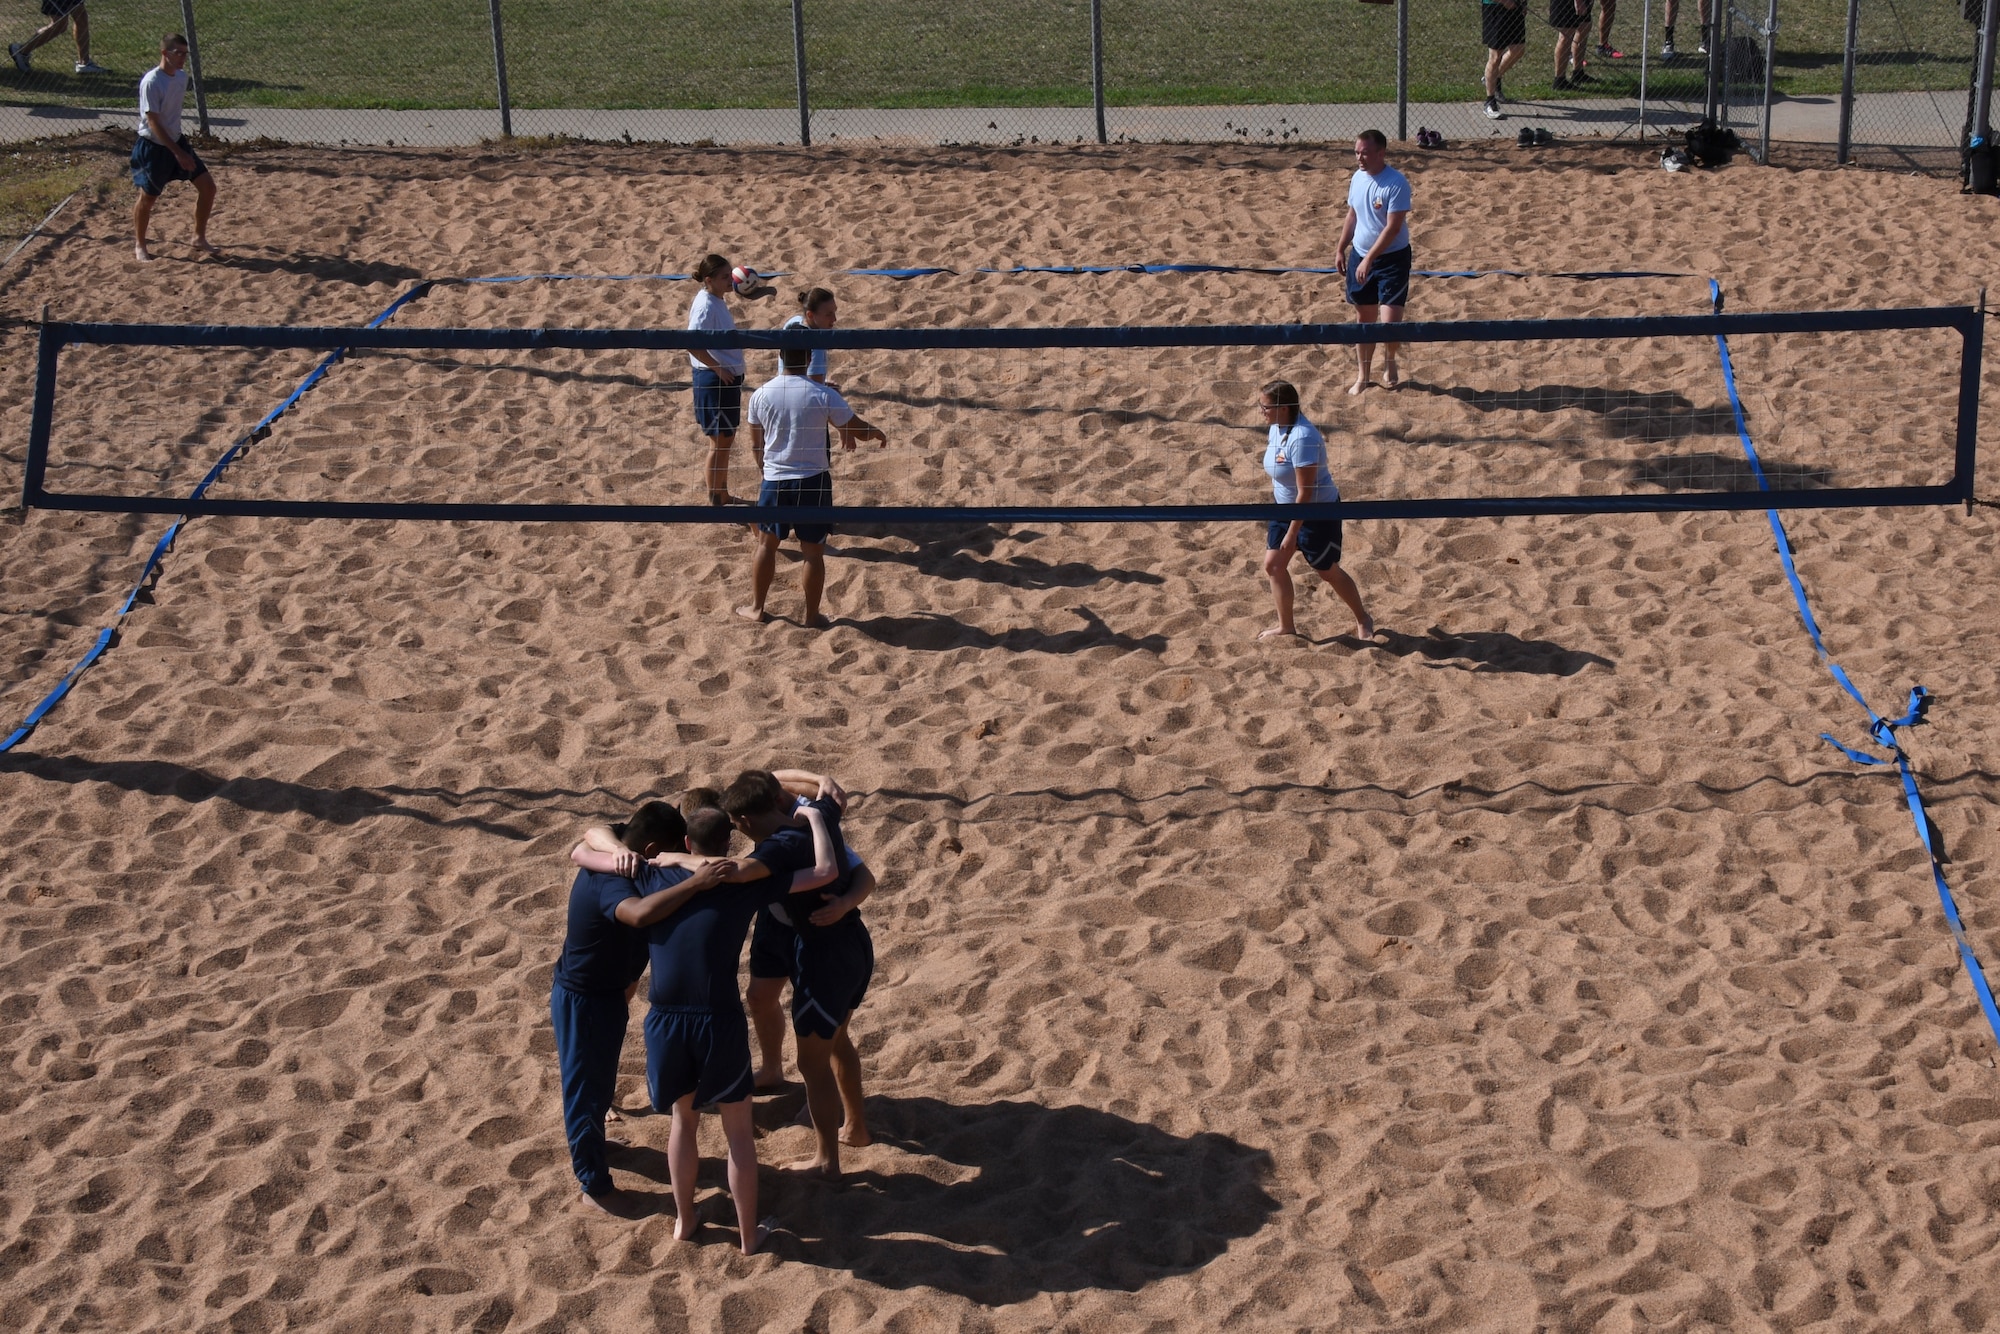 Airmen huddle before beginning a sand volleyball match during the Sports Day at Mathis Fitness Center on Goodfellow Air Force Base, Texas, April 13, 2018. Many different units from Goodfellow competed, but the 315th Training Squadron took first place in this category.